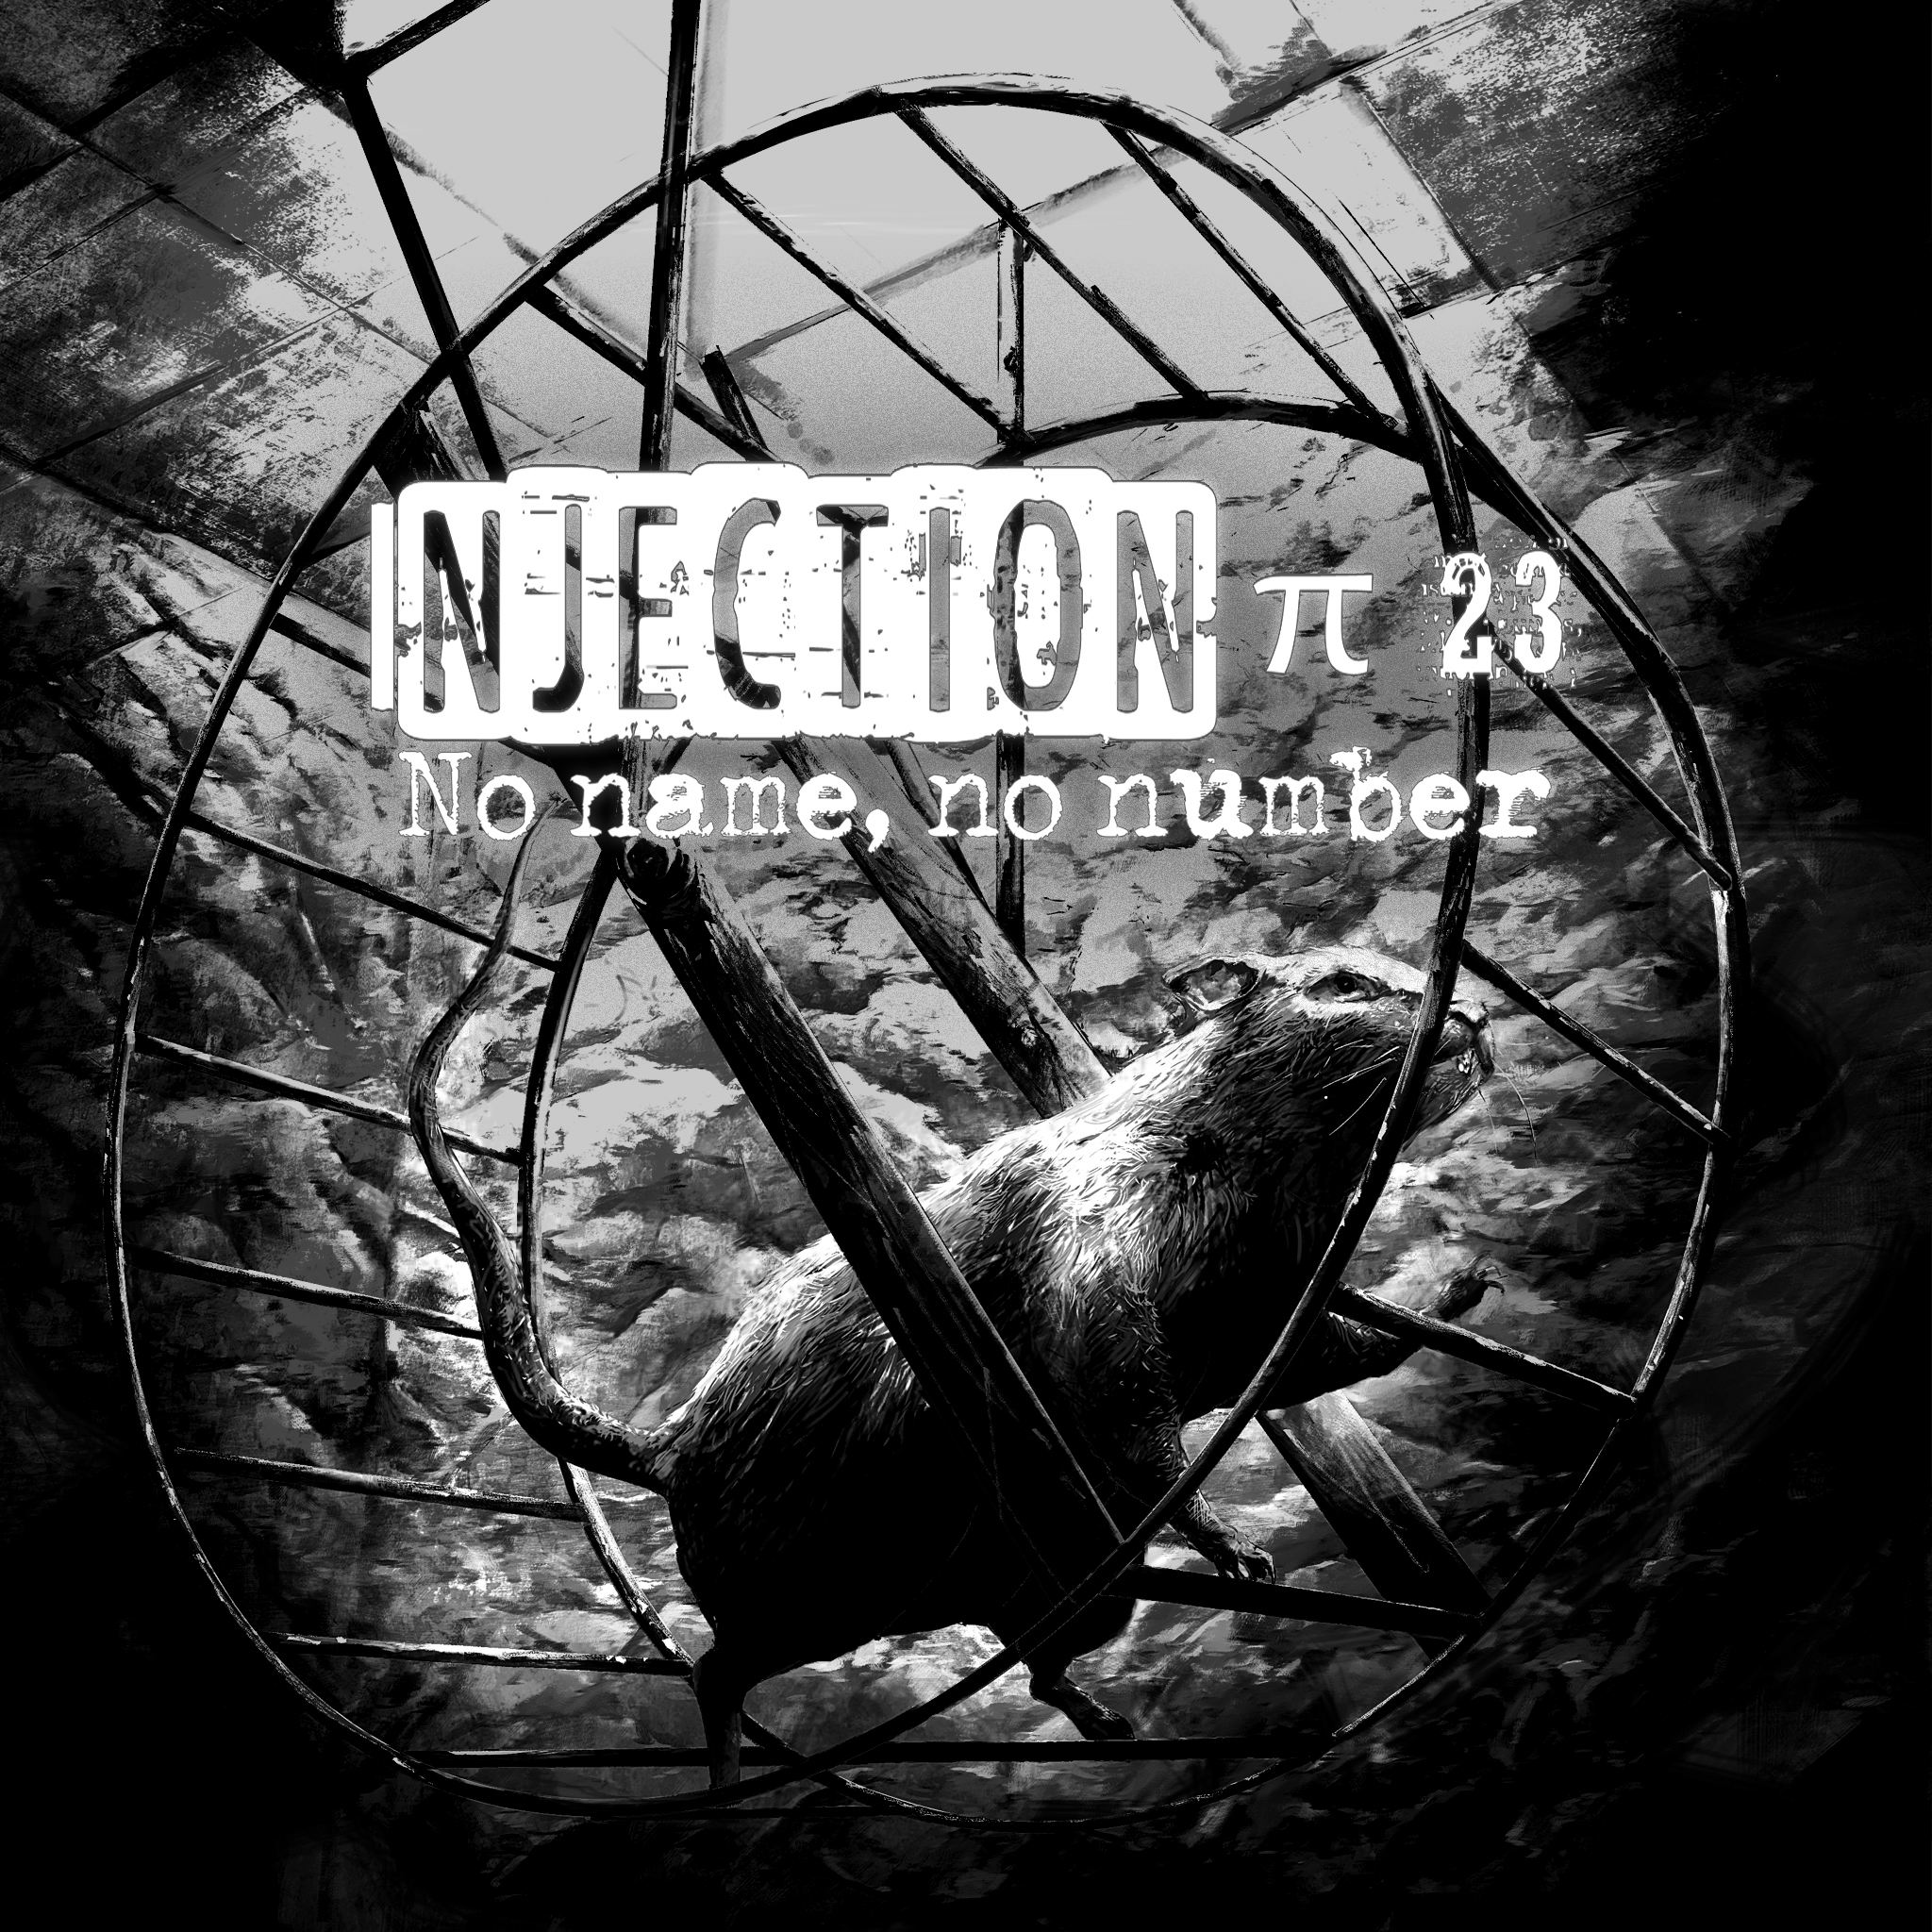 Thumbnail of Injection 23 'No name, no number' on PS4